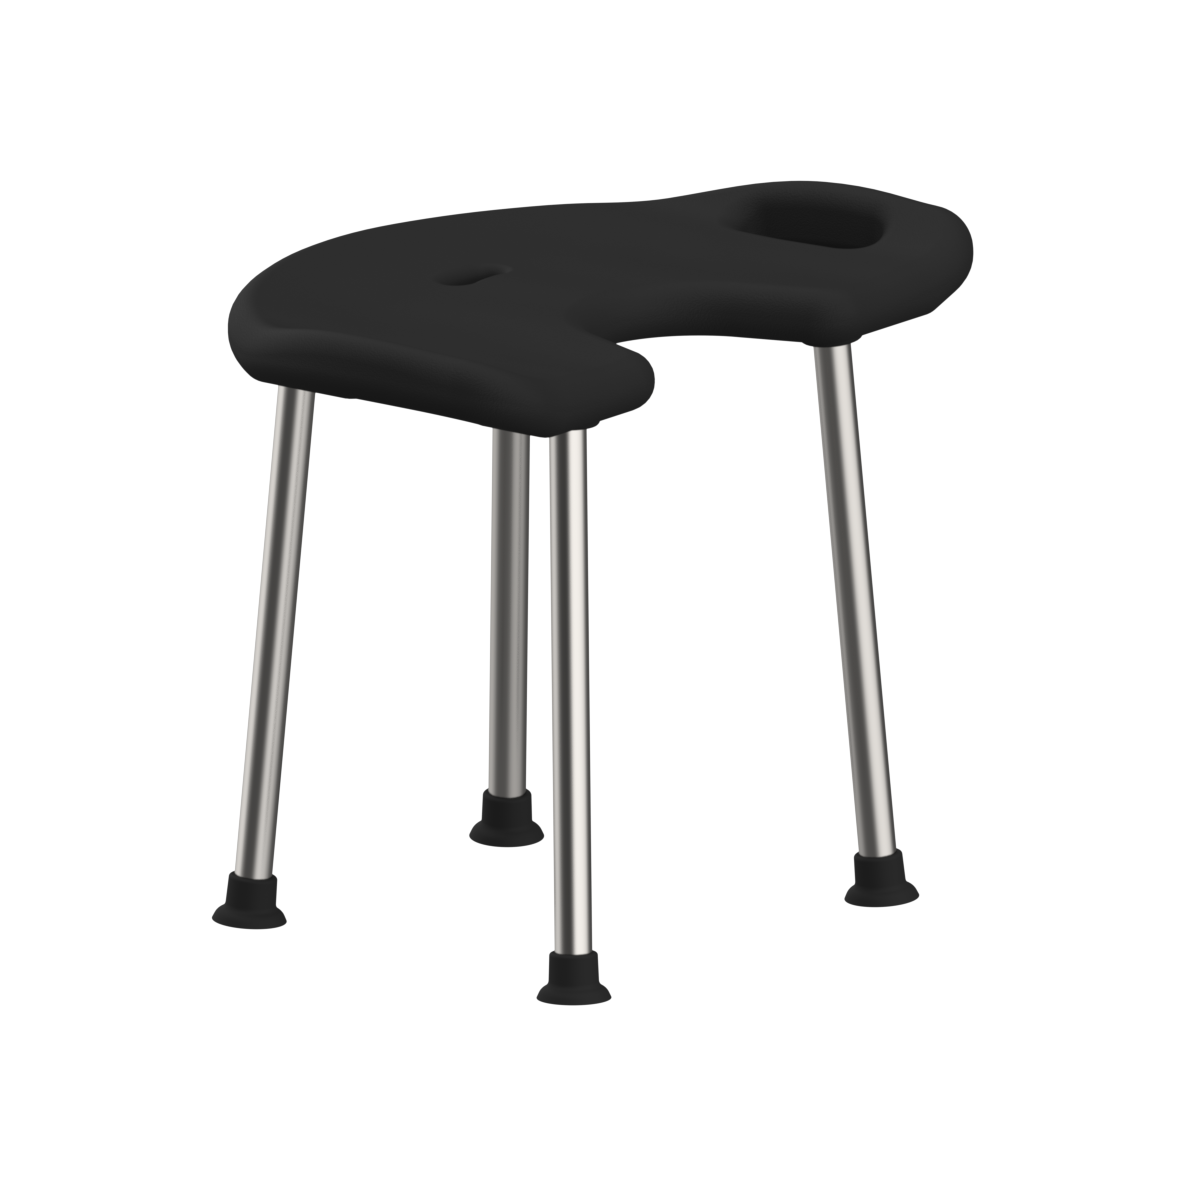 Inox Care Stool, with hygiene recess, 600 x 400 x 115 mm, Stainless steel, padded, colour black